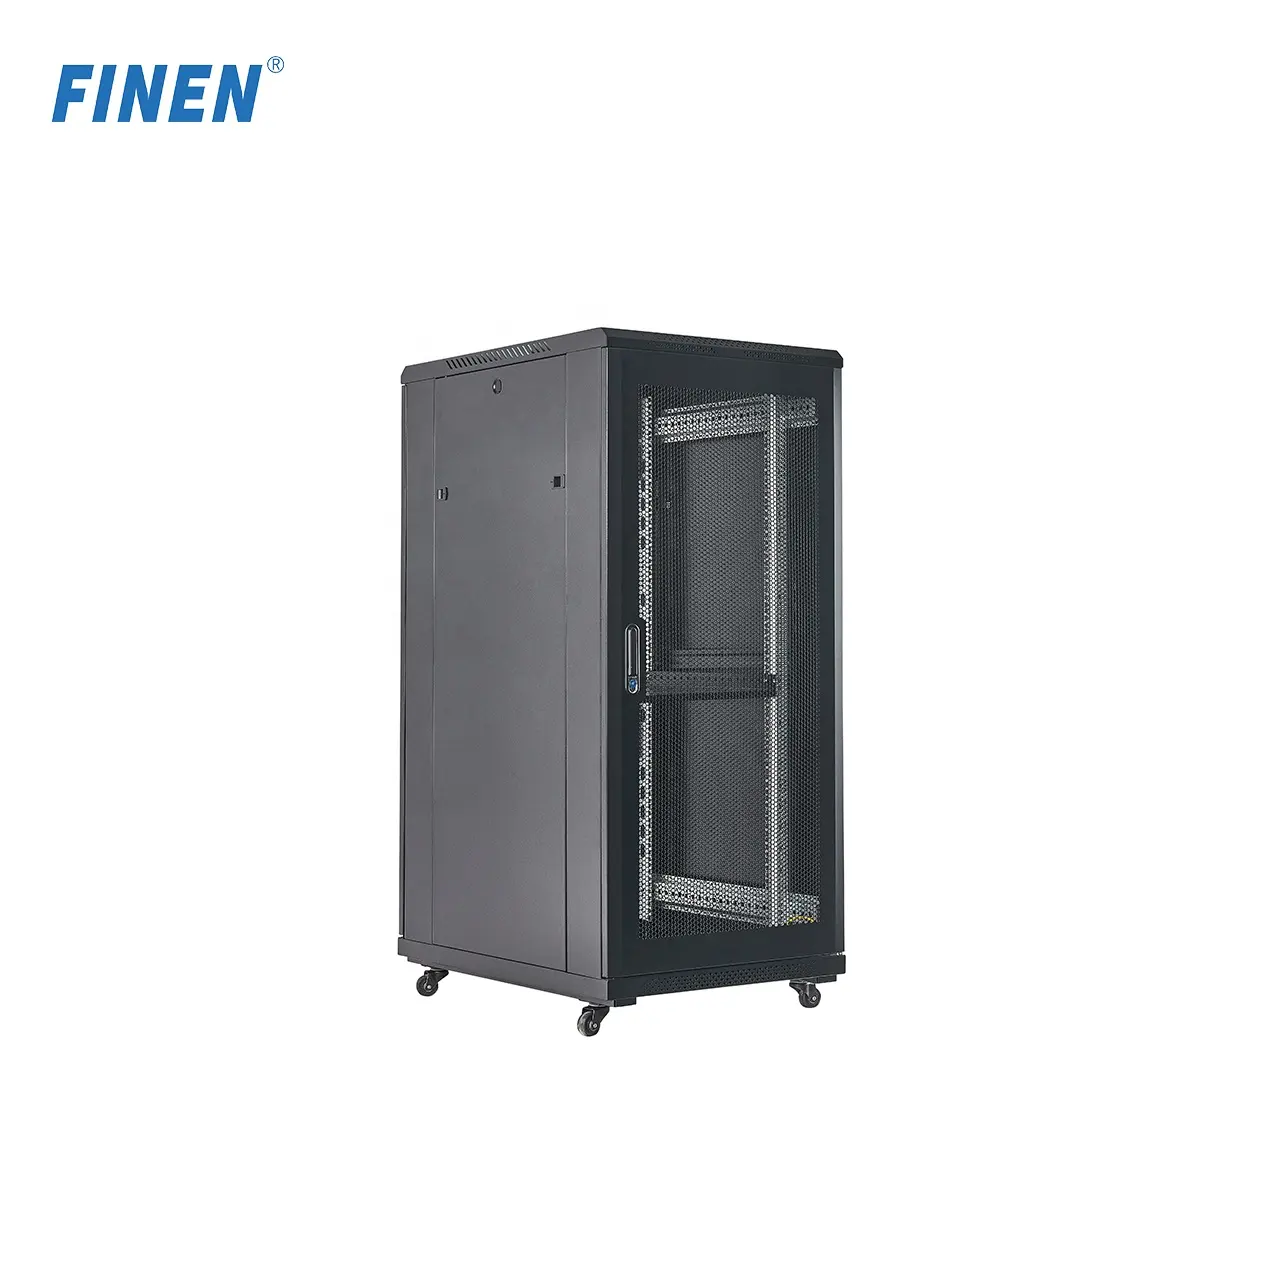 DVR Routers Switches Telcecom Network 600mm*800mm*27U Data Center Server Rack Network Cabinet